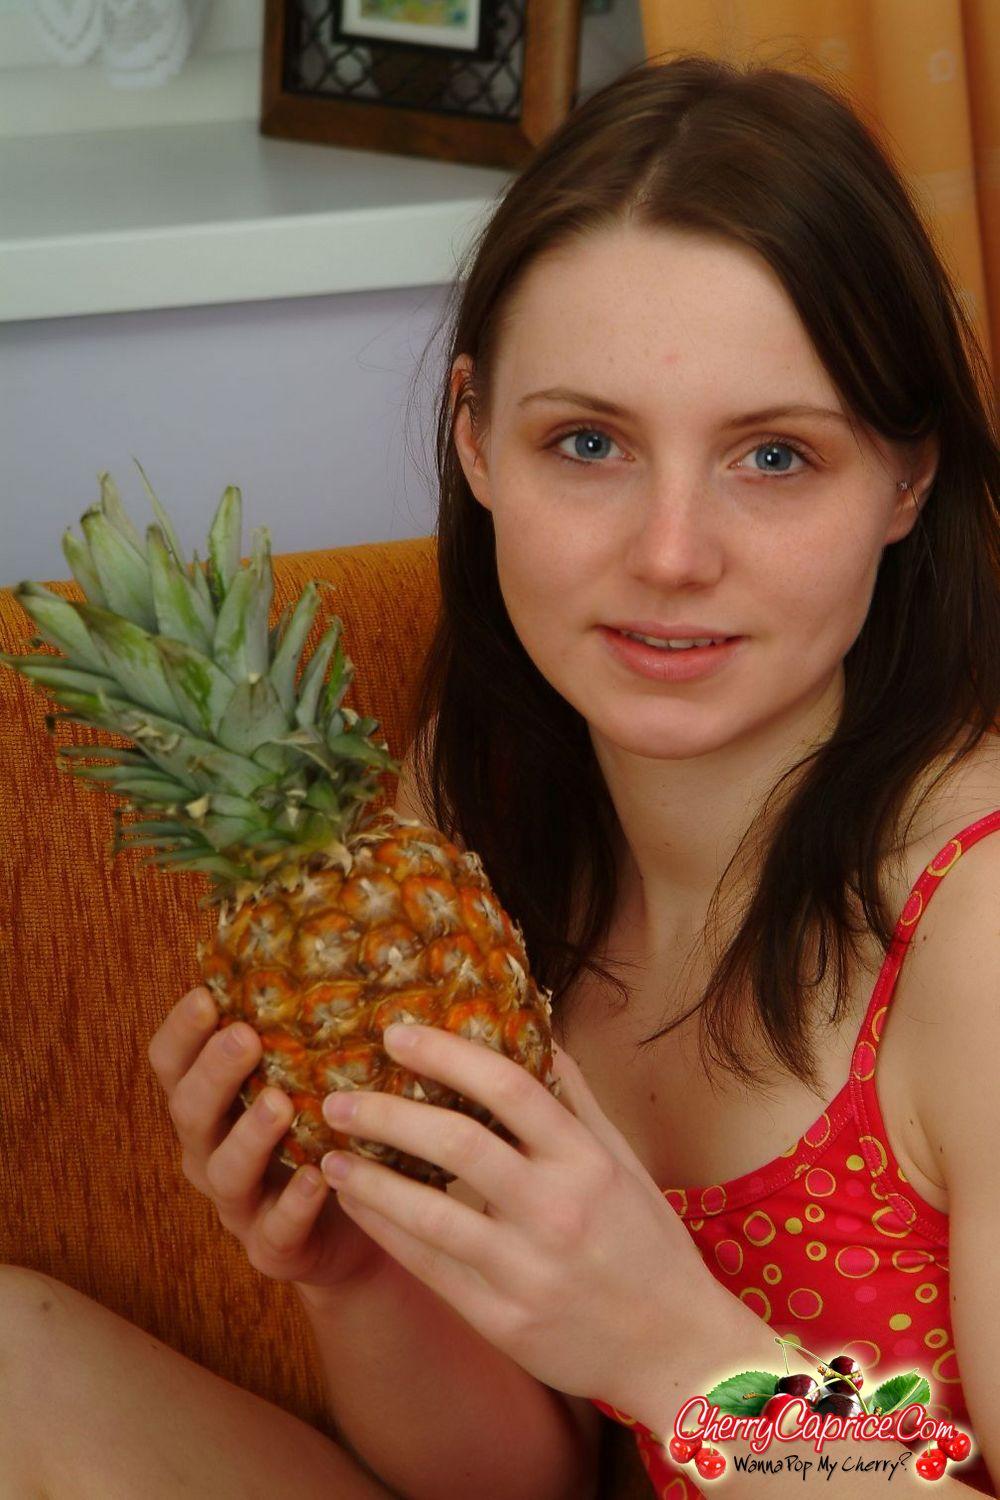 Pictures of teen Cherry Caprice getting intimate with a pineapple #53774657